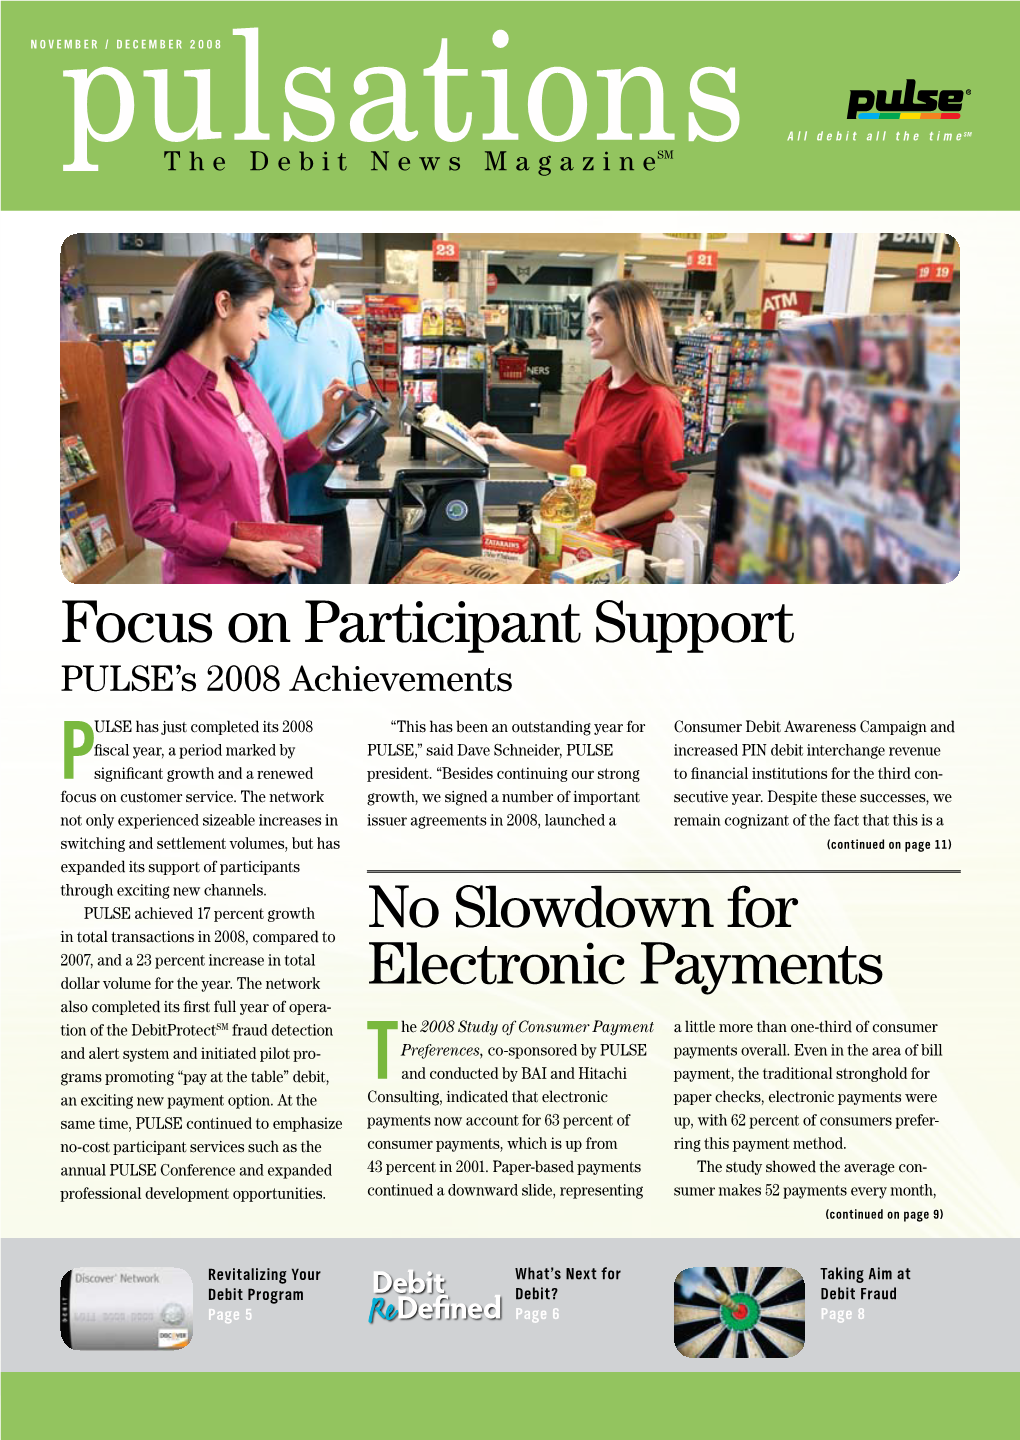 Focus on Participant Support No Slowdown for Electronic Payments